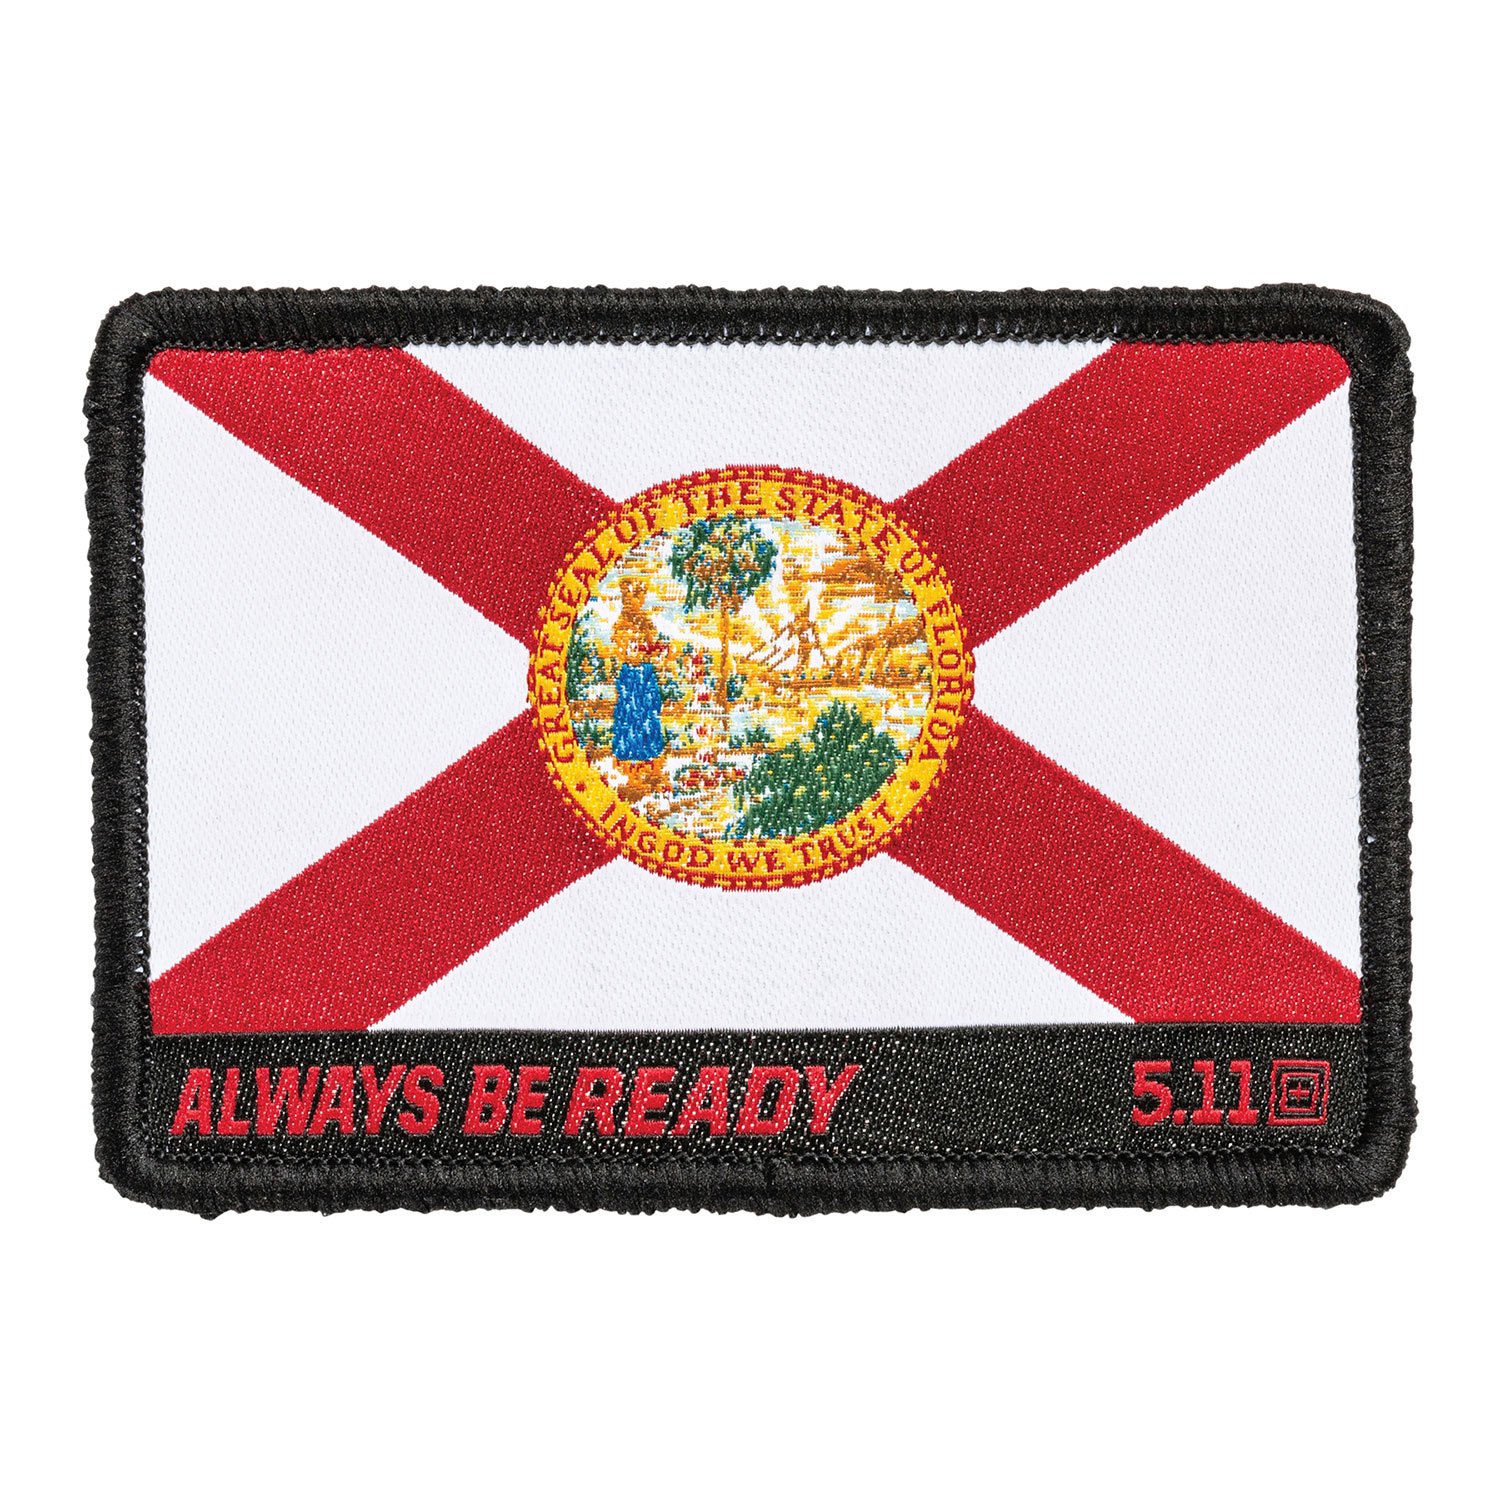 5.11 STATE FLAG PATCH